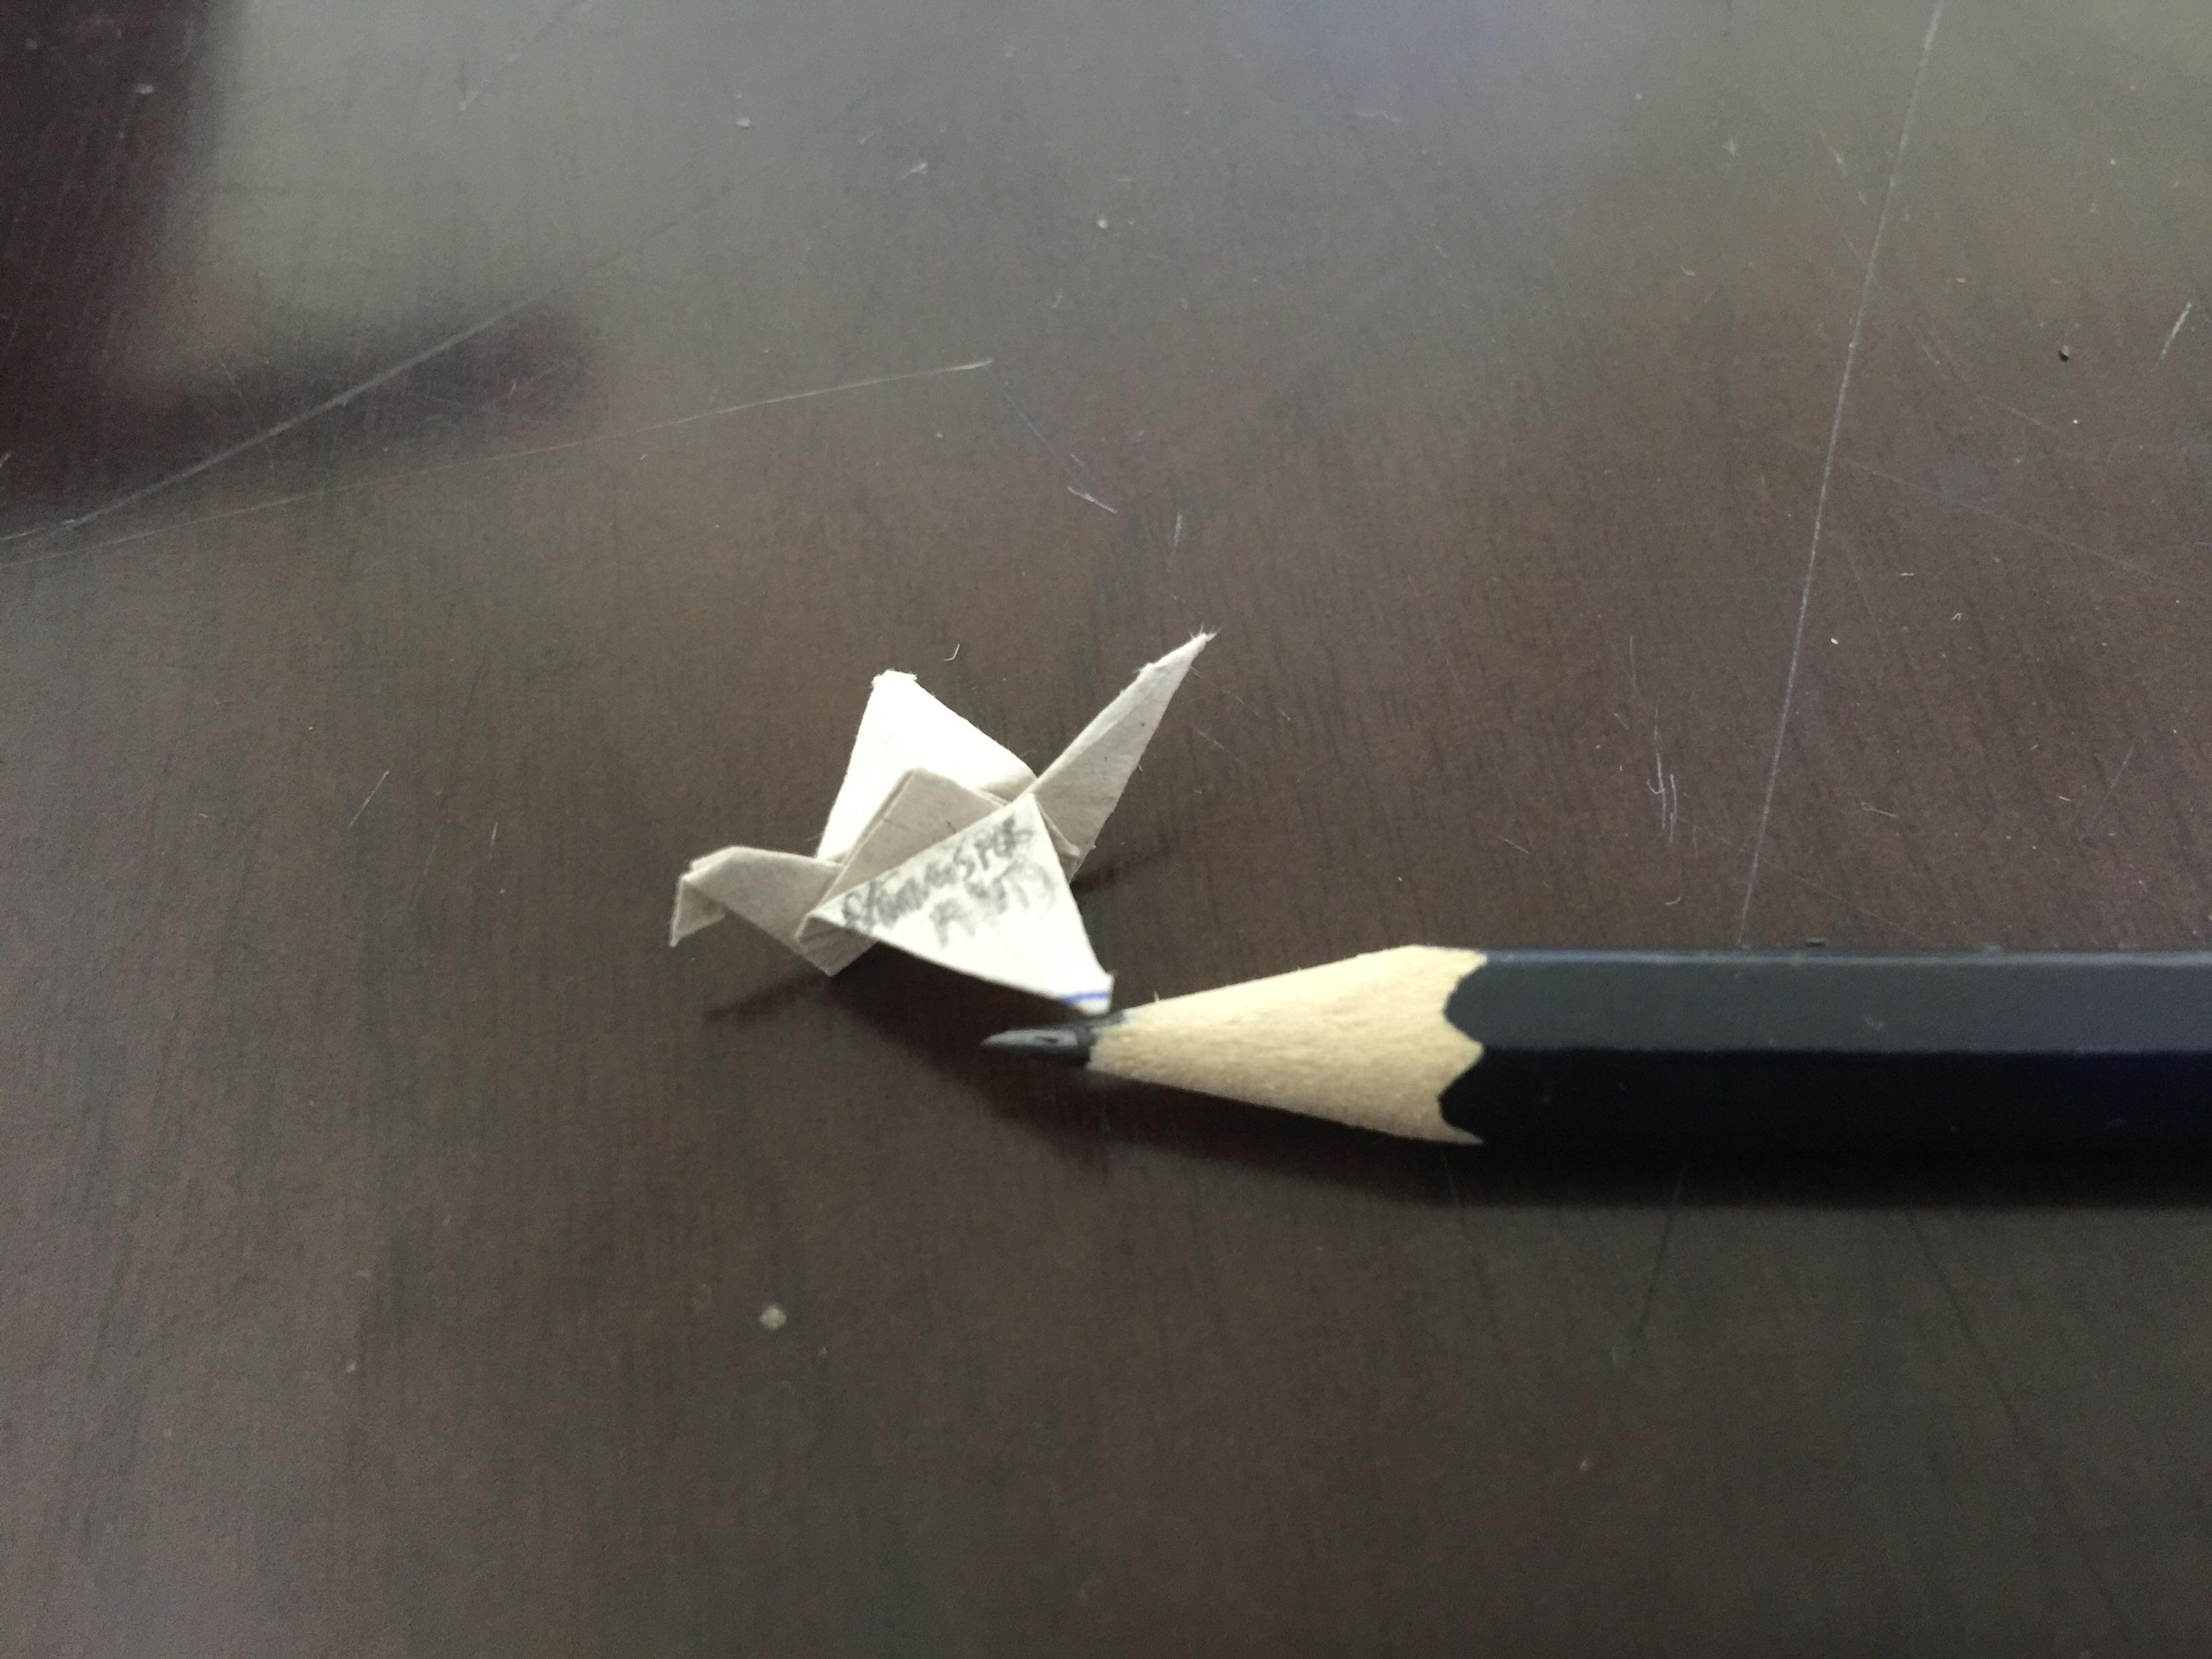 What Is Origamy What Is This An Origami Crane For Ants Thingsforants